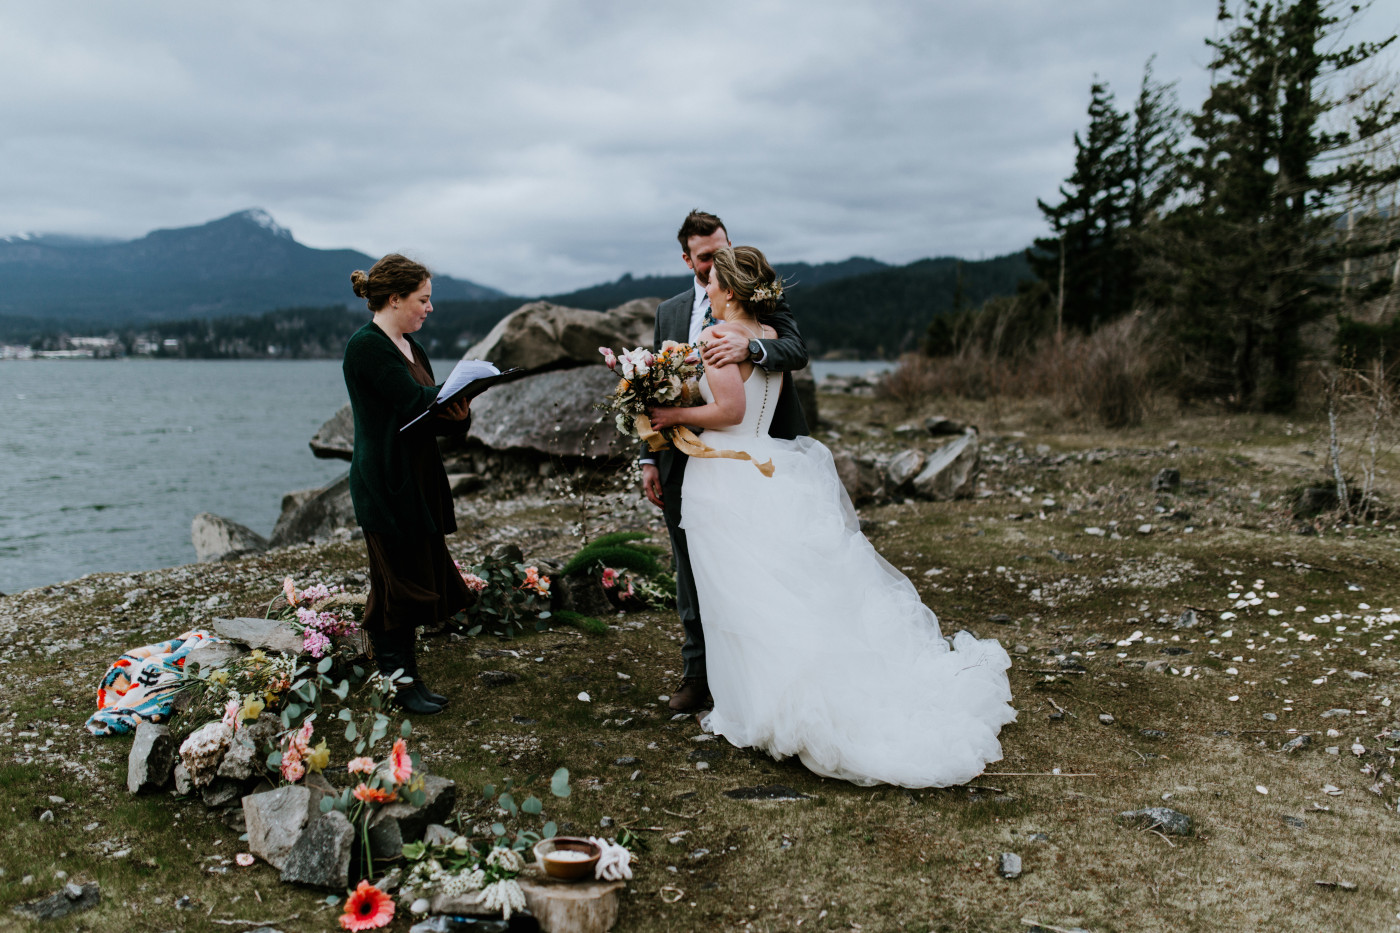 Lennie holds Allison to keep her warm. Elopement photography at Columbia River Gorge by Sienna Plus Josh.